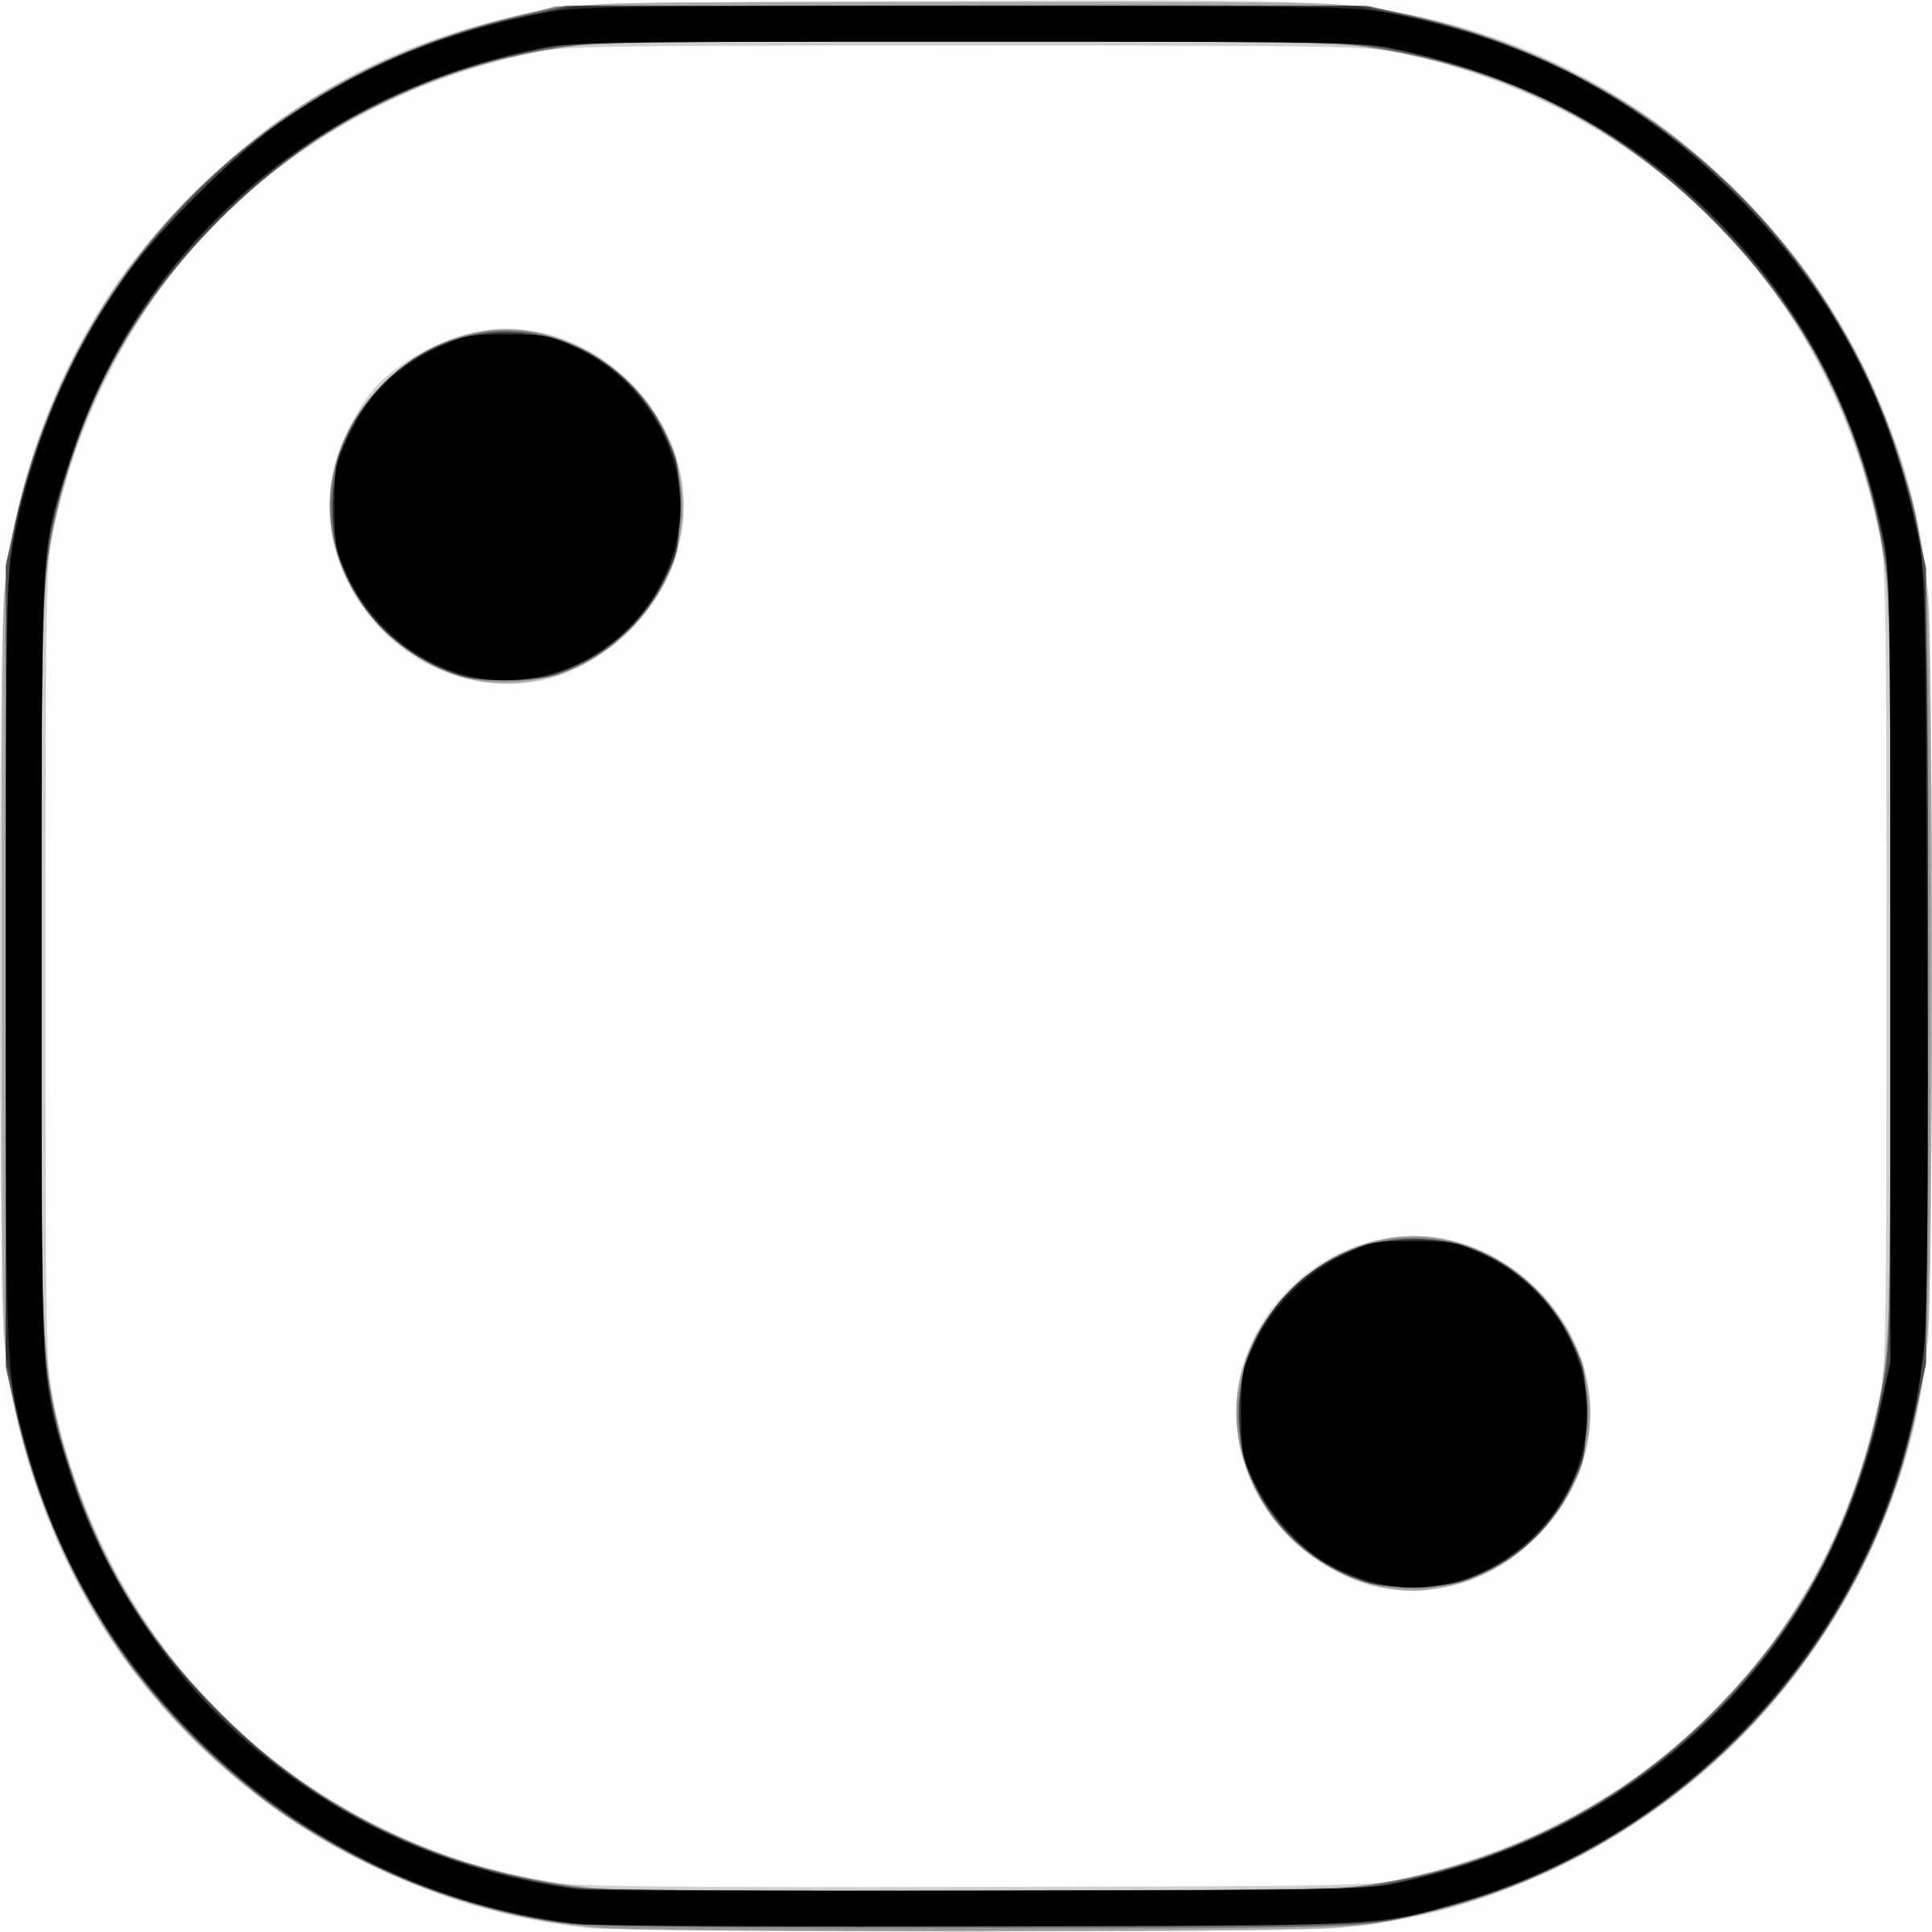 Dice clipart two